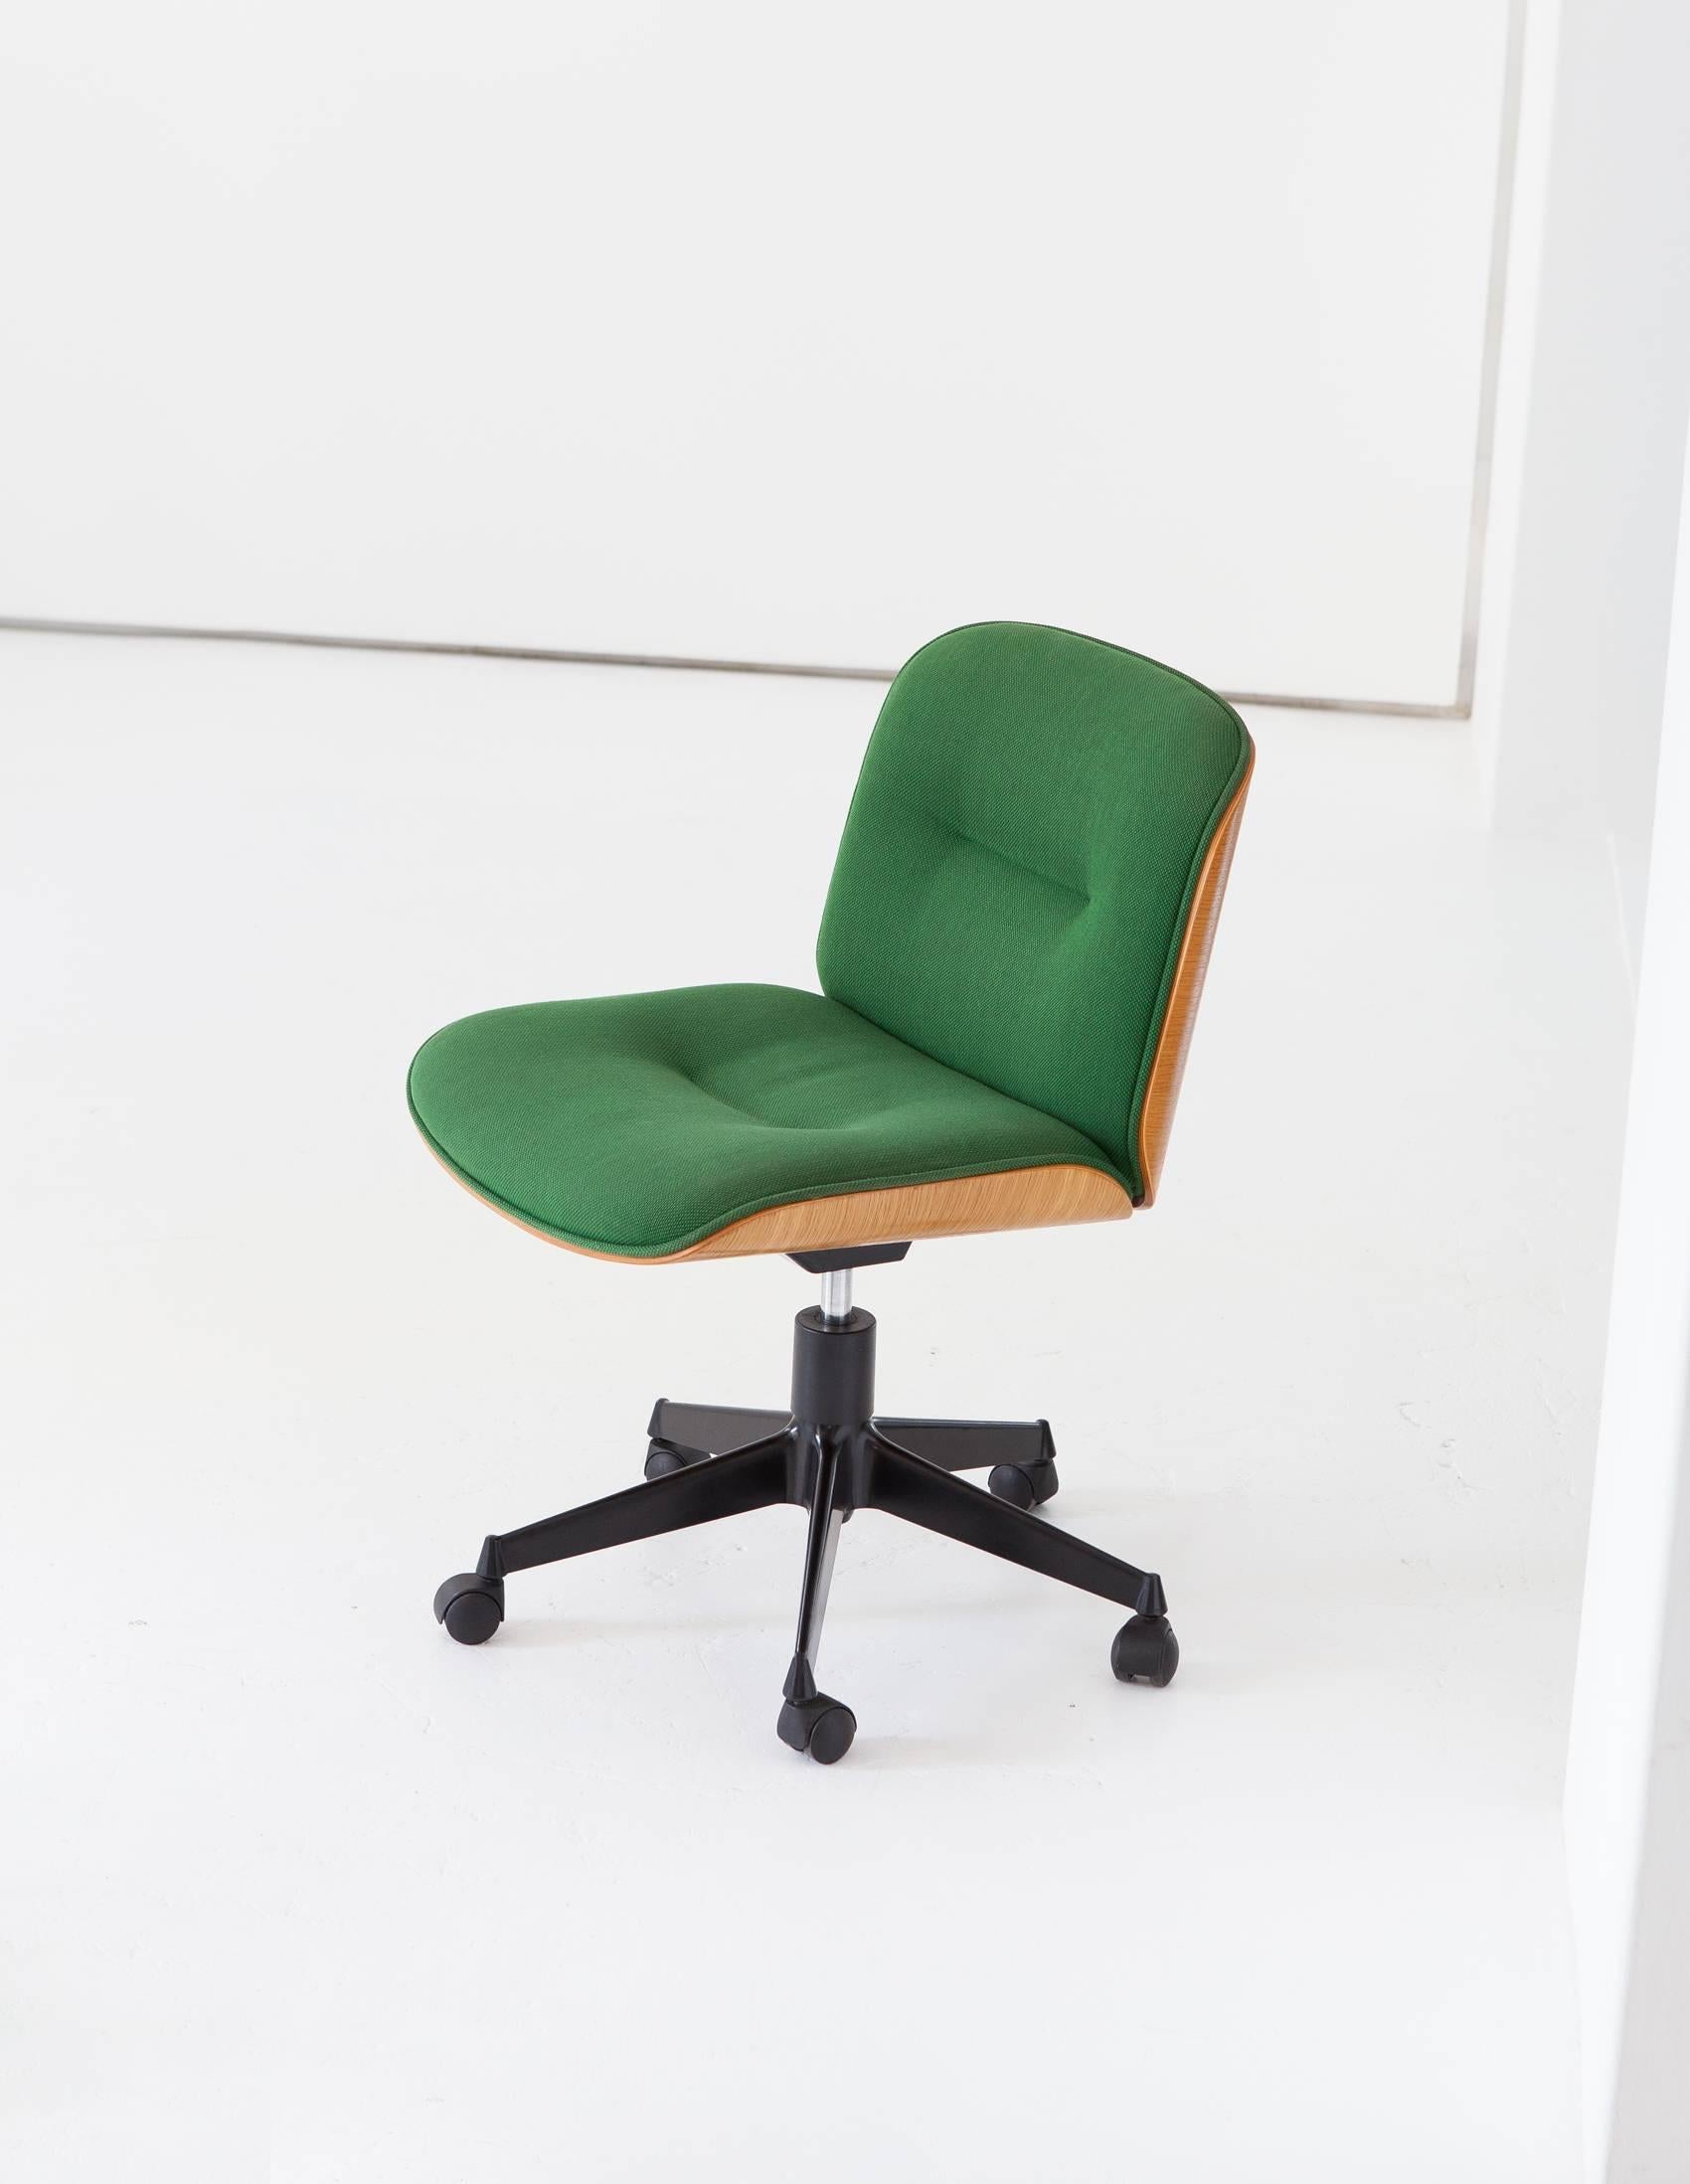 Office desk chair designed by Ico Parisi and produced by M.I.M. (Mobili Italiani Moderni) Roma, Italy, 1960s.
Curved oakwood frame, restored and in very good condition. New black enamel on the iron legs and original green fabric.
We have